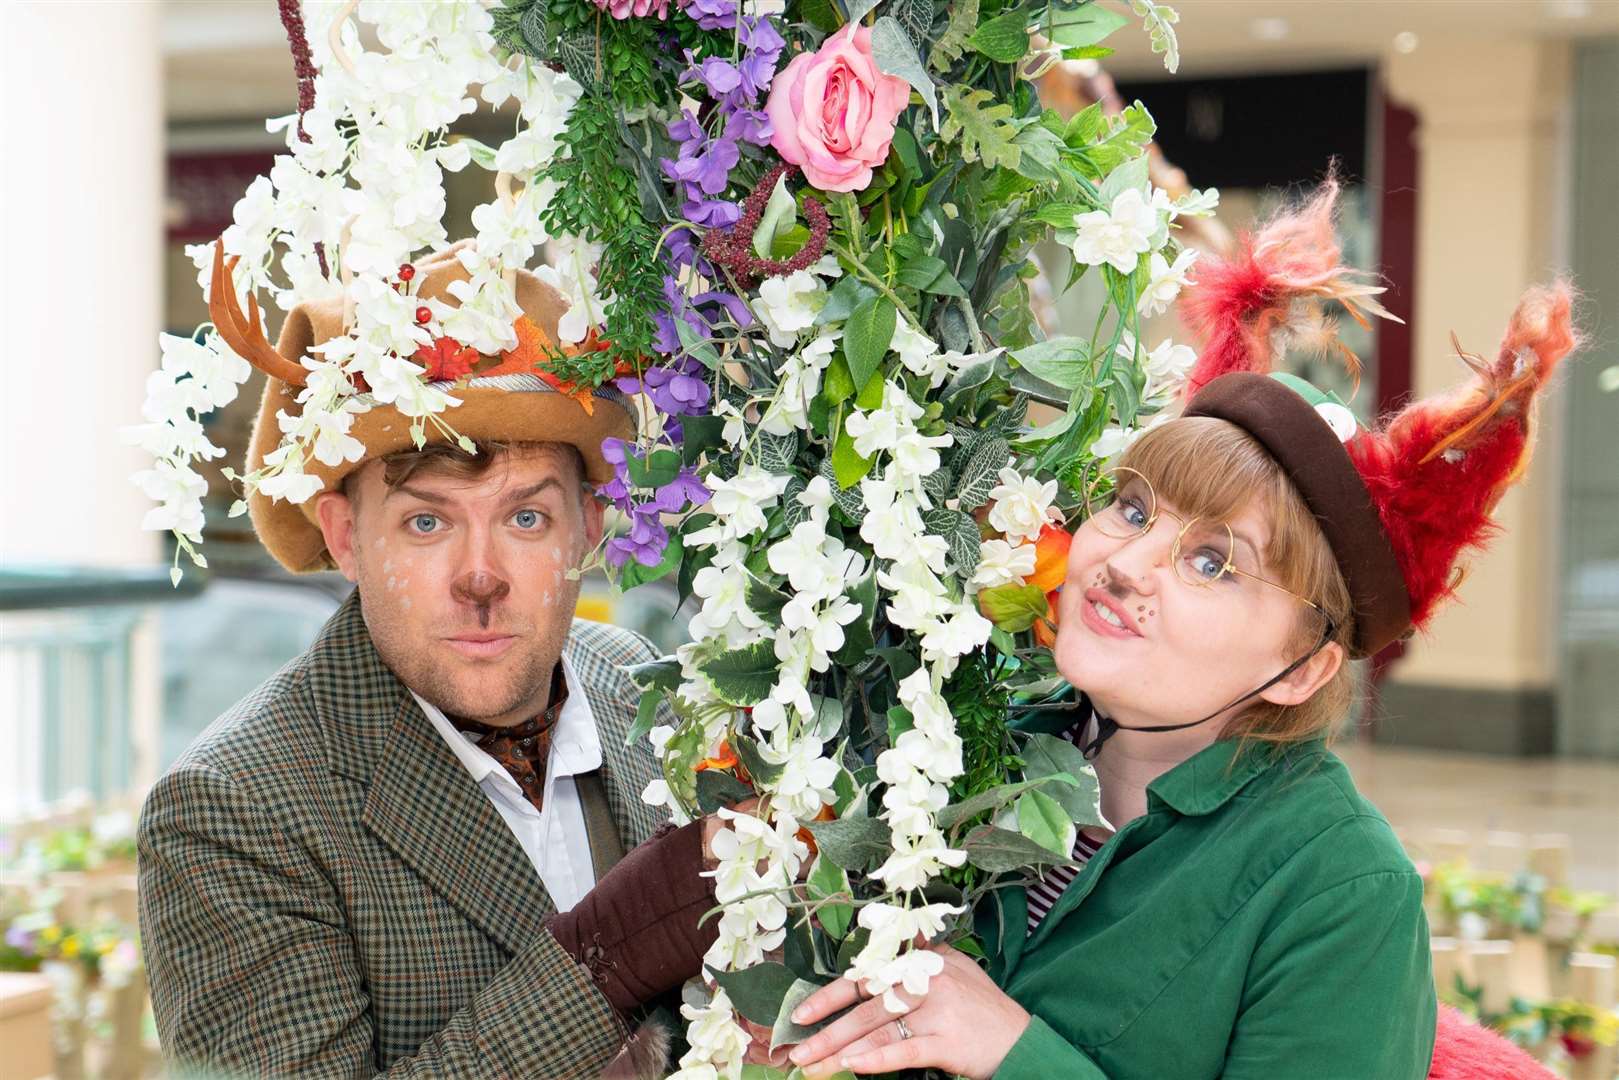 Meet some magical characters at Royal Victoria Place